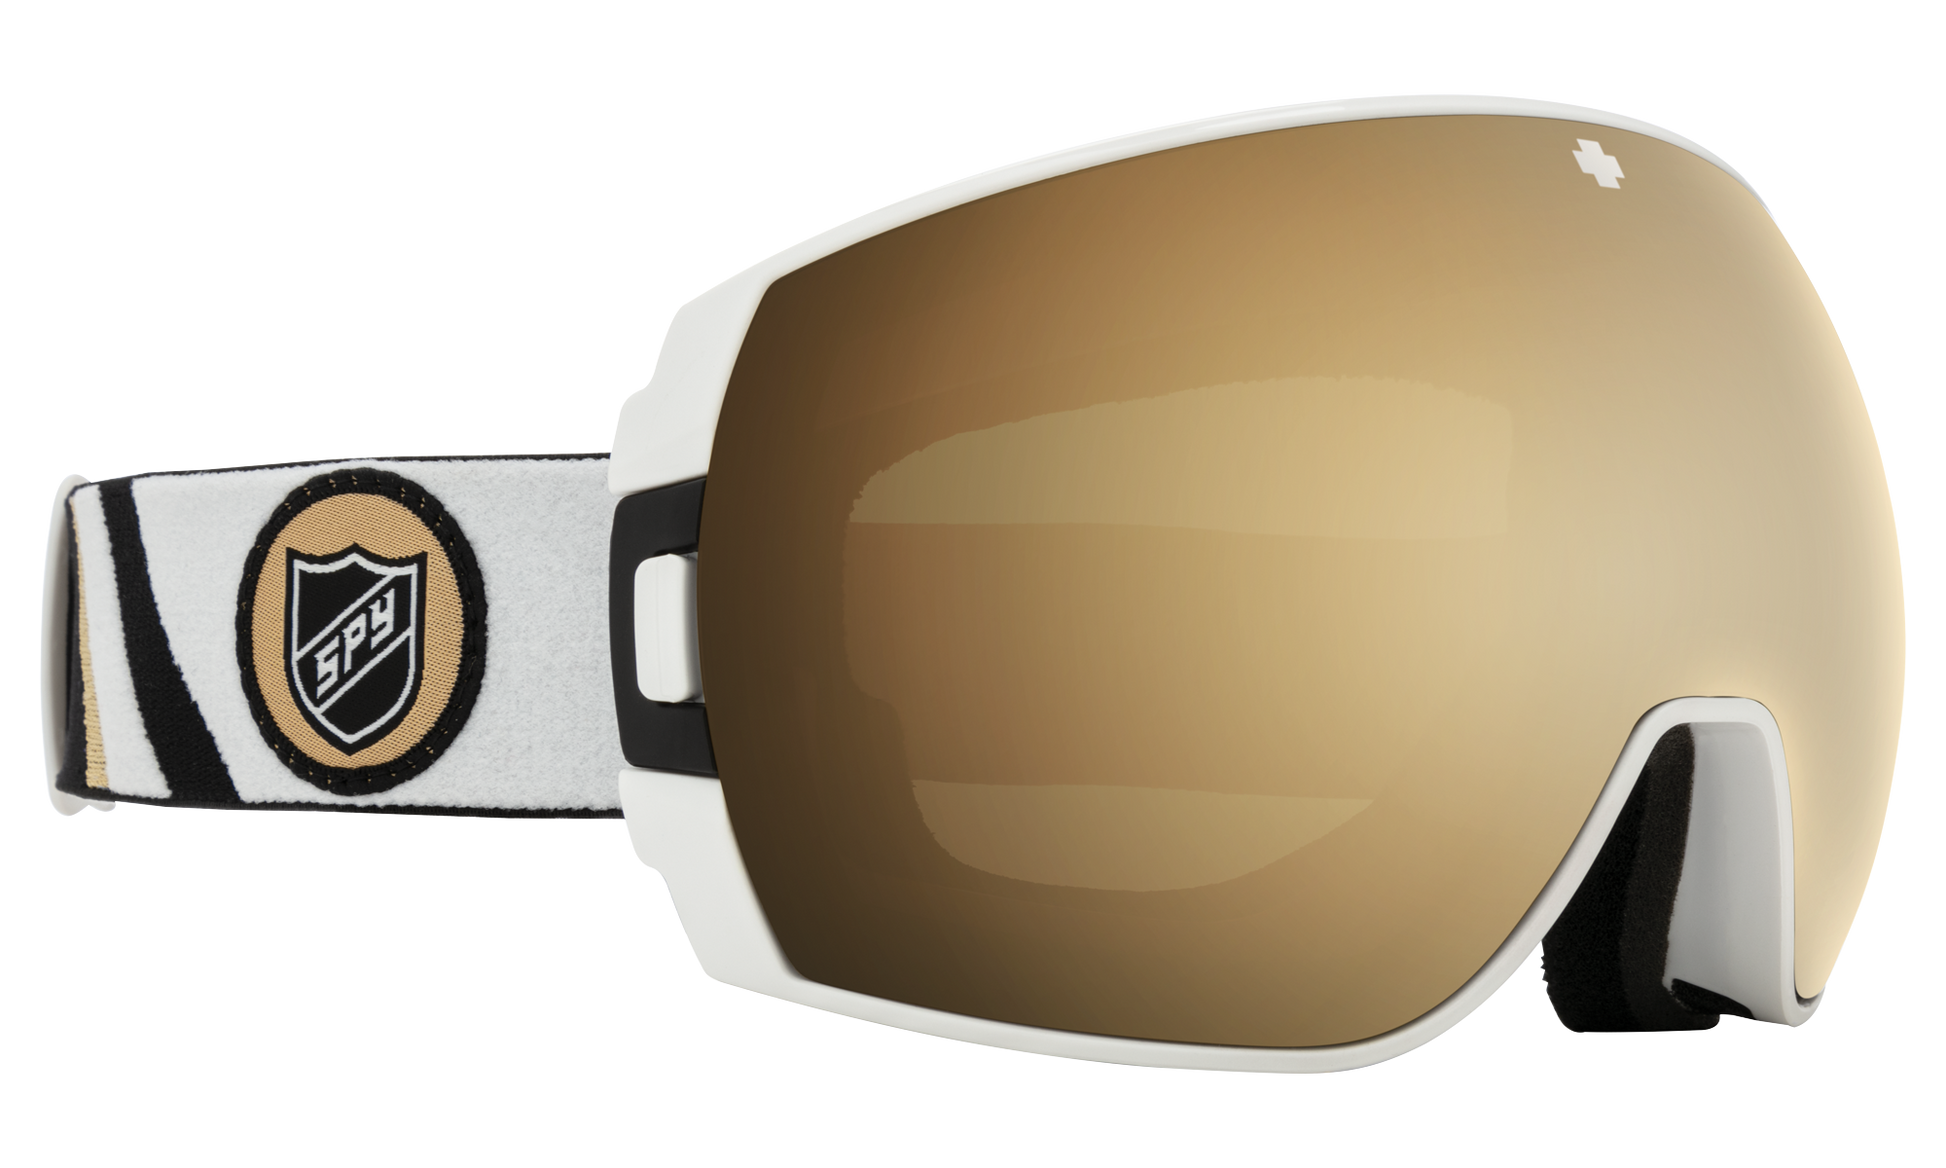 SPY Legacy Snow Goggle Goggles  HD Plus Bronze with Gold Spectra Mirror + HD Plus LL Persimmon with Silver Spectra Mirror SPY + Tom Wallisch One Size